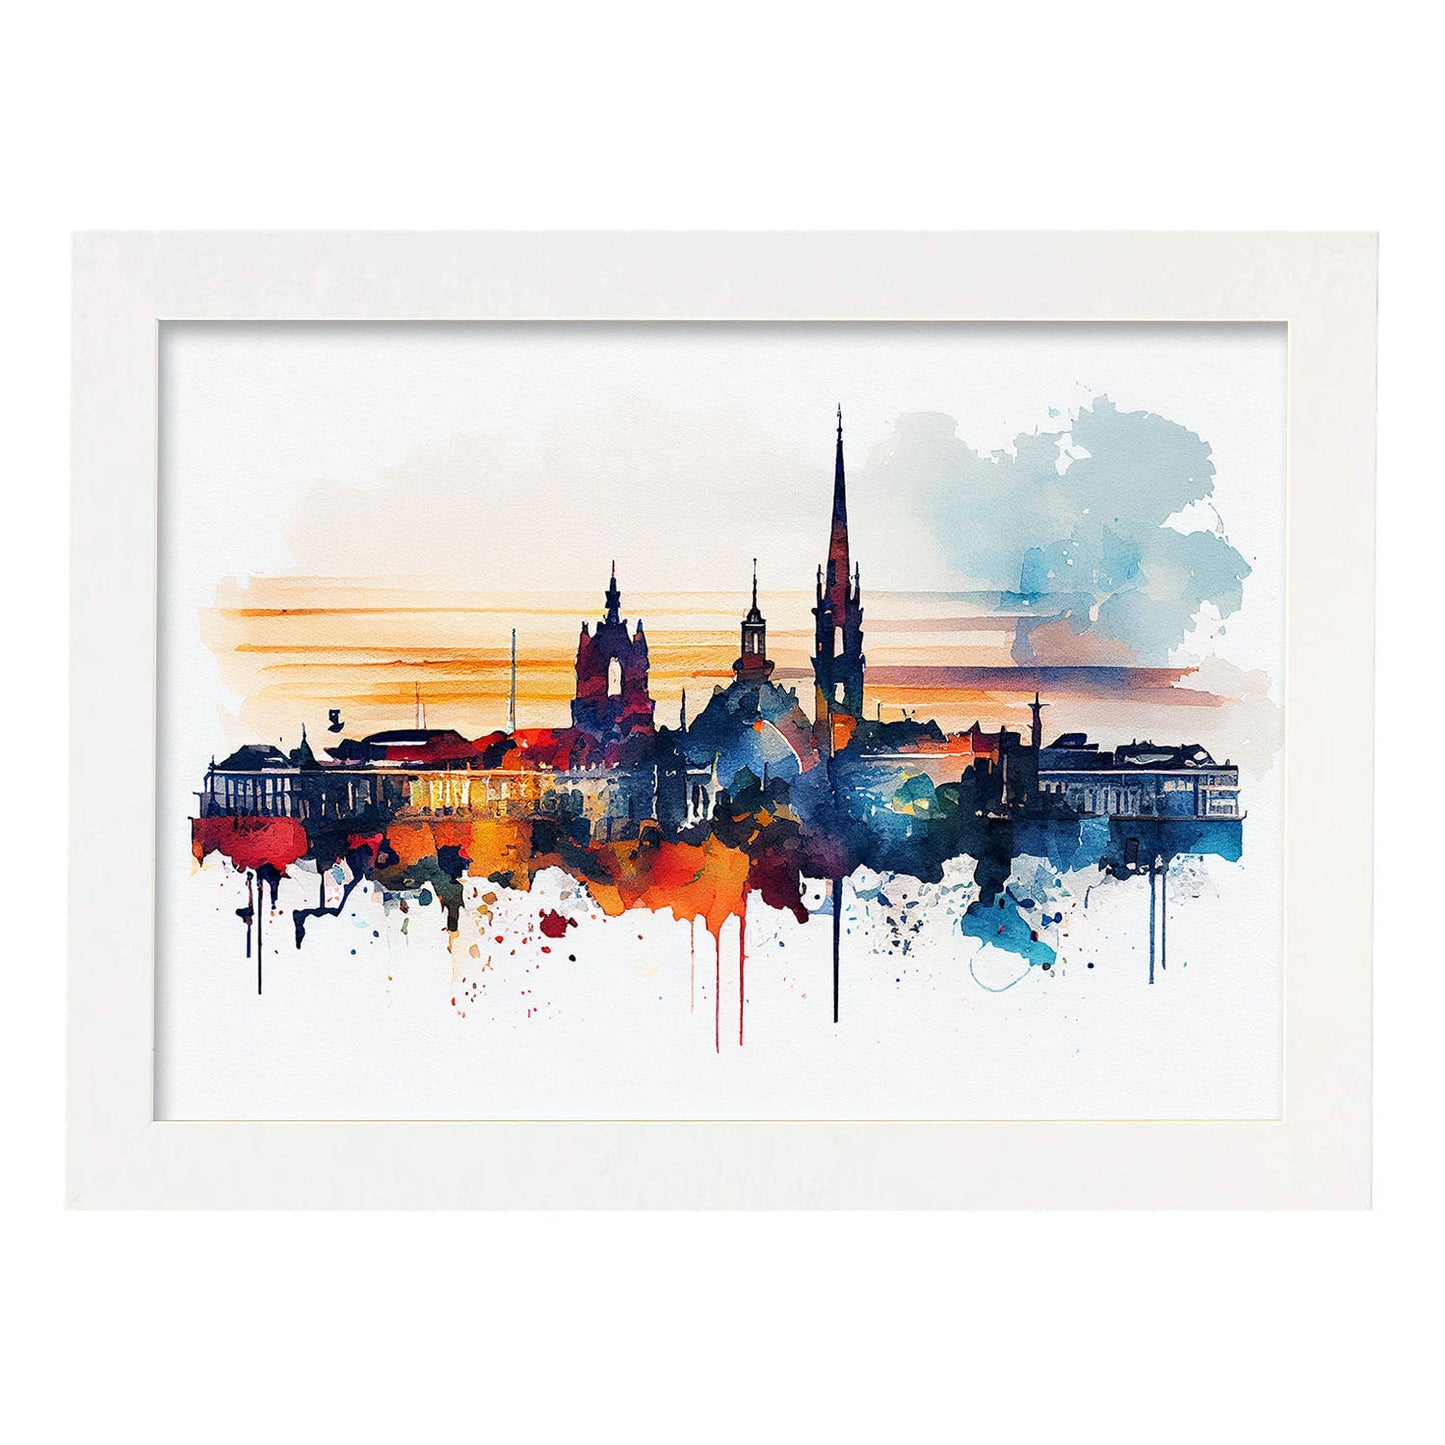 Nacnic watercolor of a skyline of the city of Bordeaux_1. Aesthetic Wall Art Prints for Bedroom or Living Room Design.-Artwork-Nacnic-A4-Marco Blanco-Nacnic Estudio SL